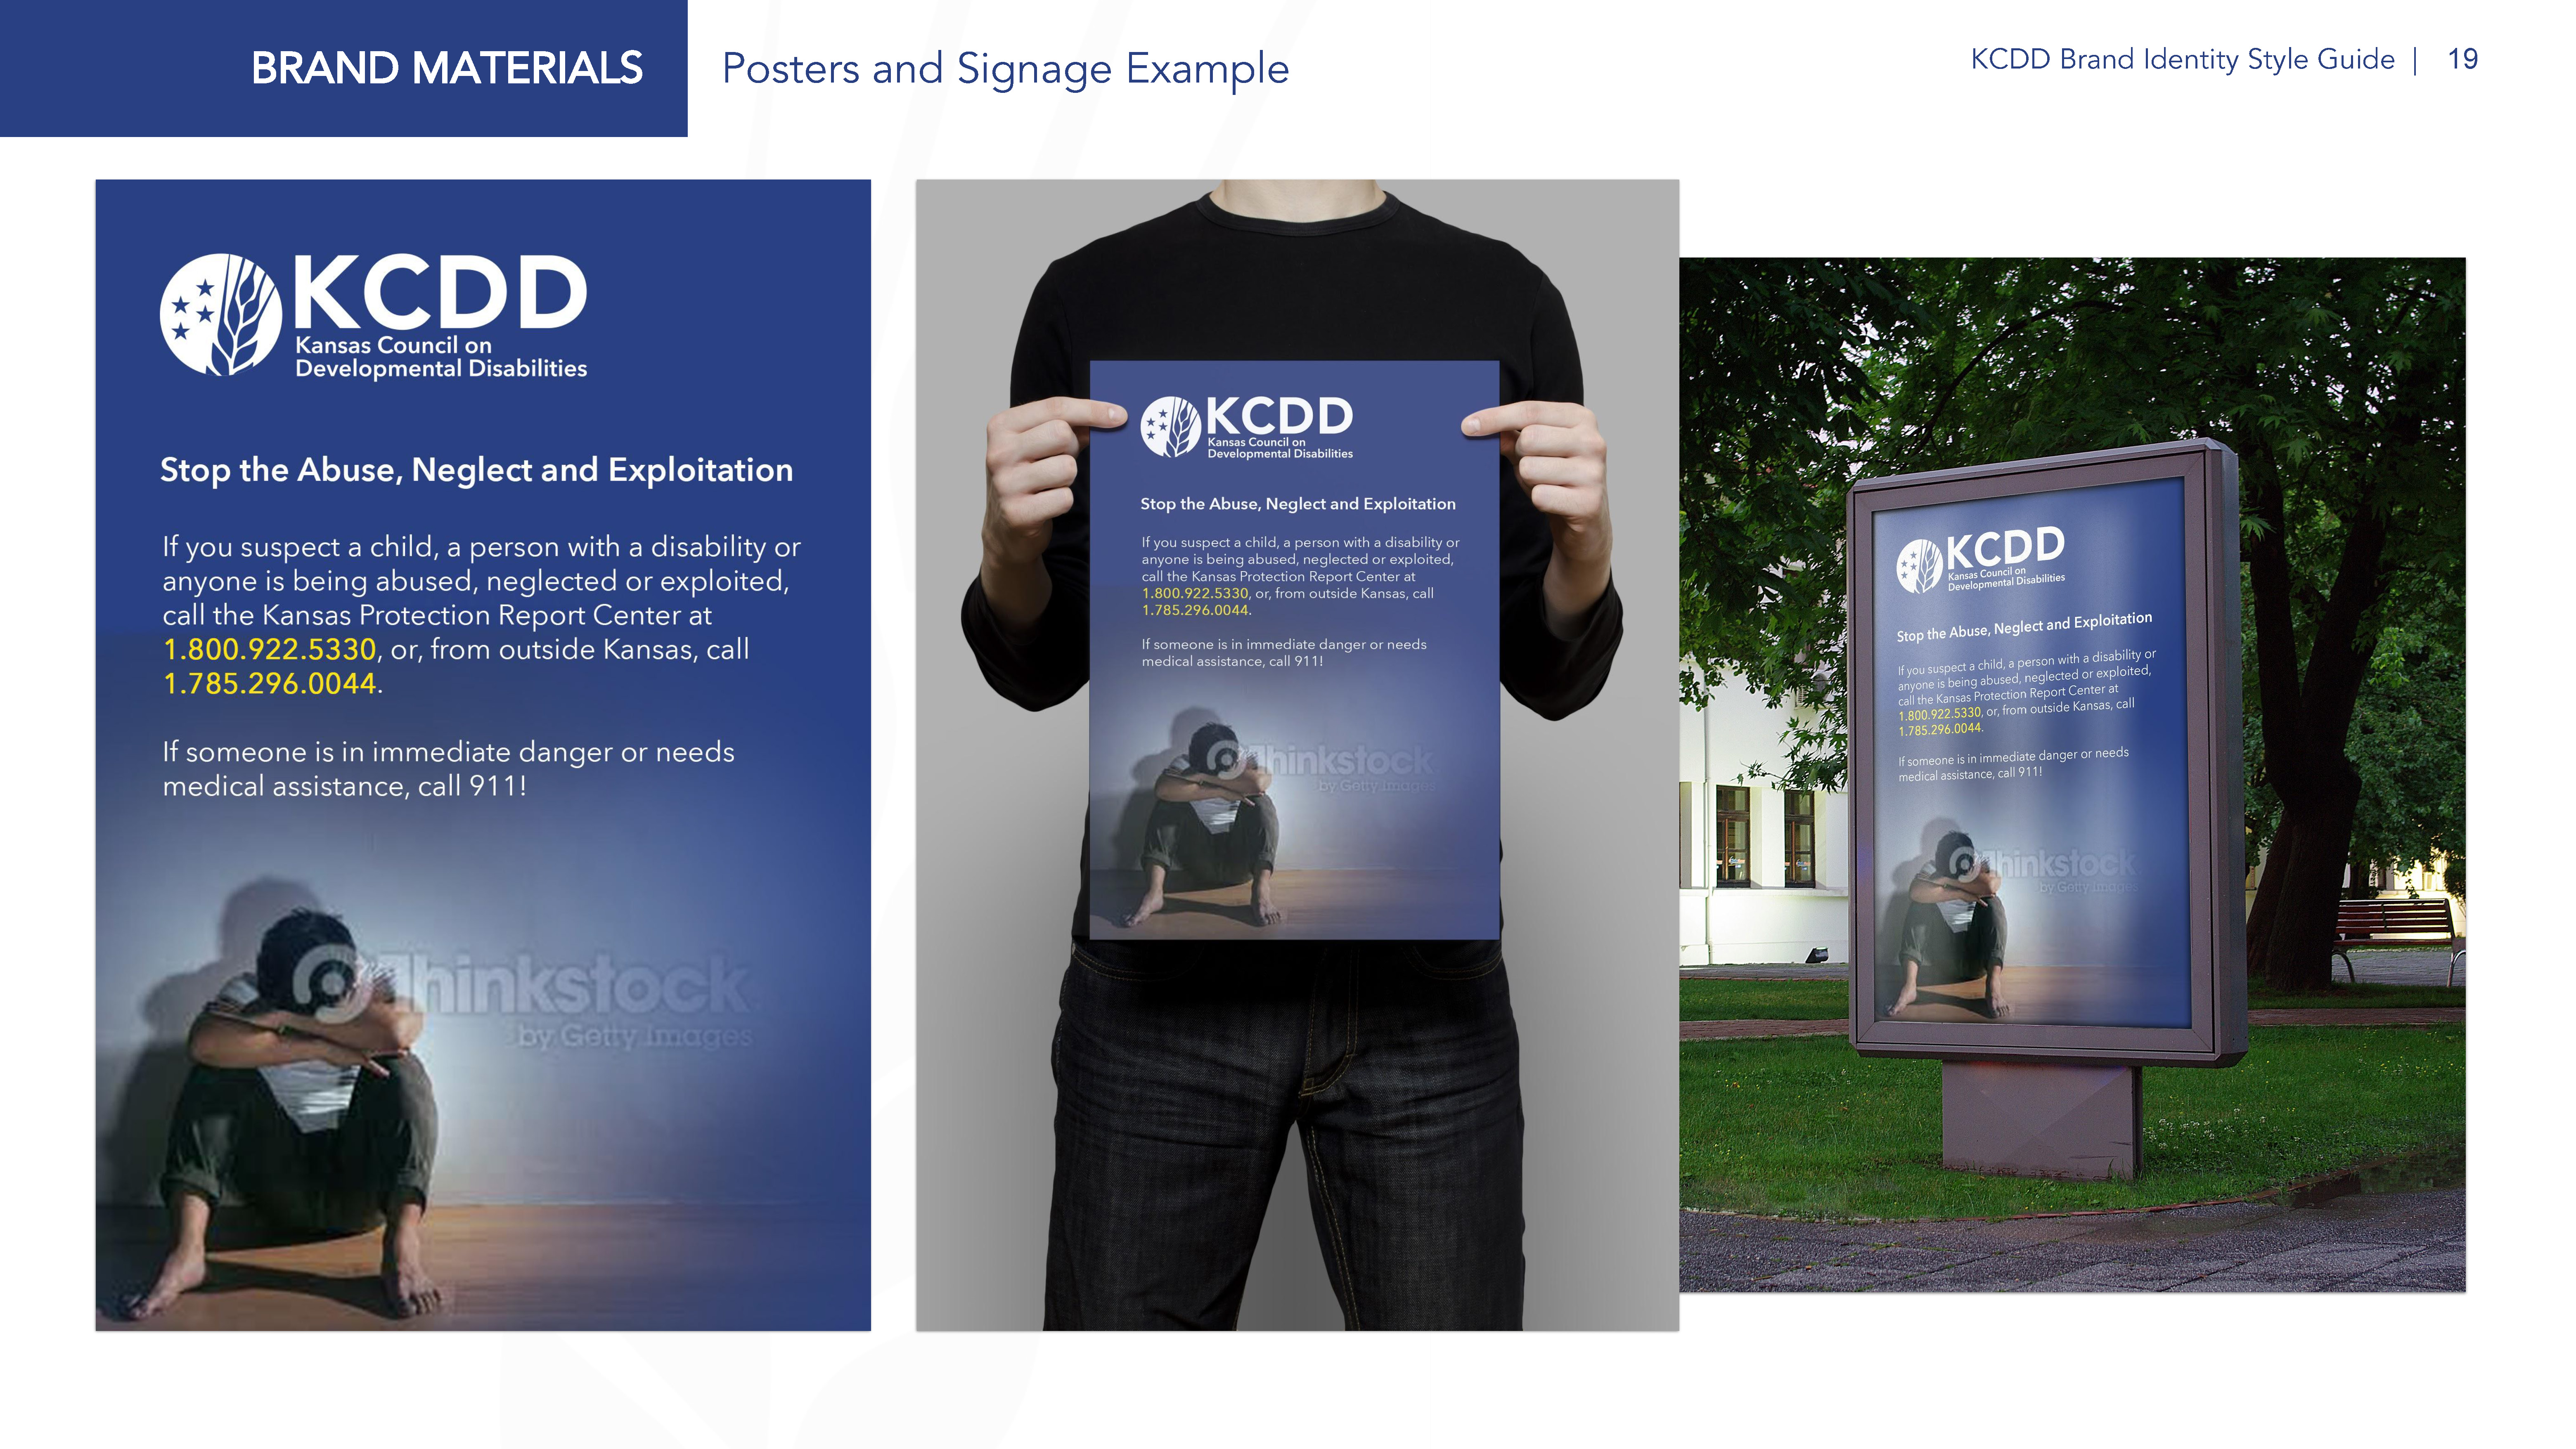 KCDD - KCDD Brand Identity Style Guide Page 19 - New Minds Group